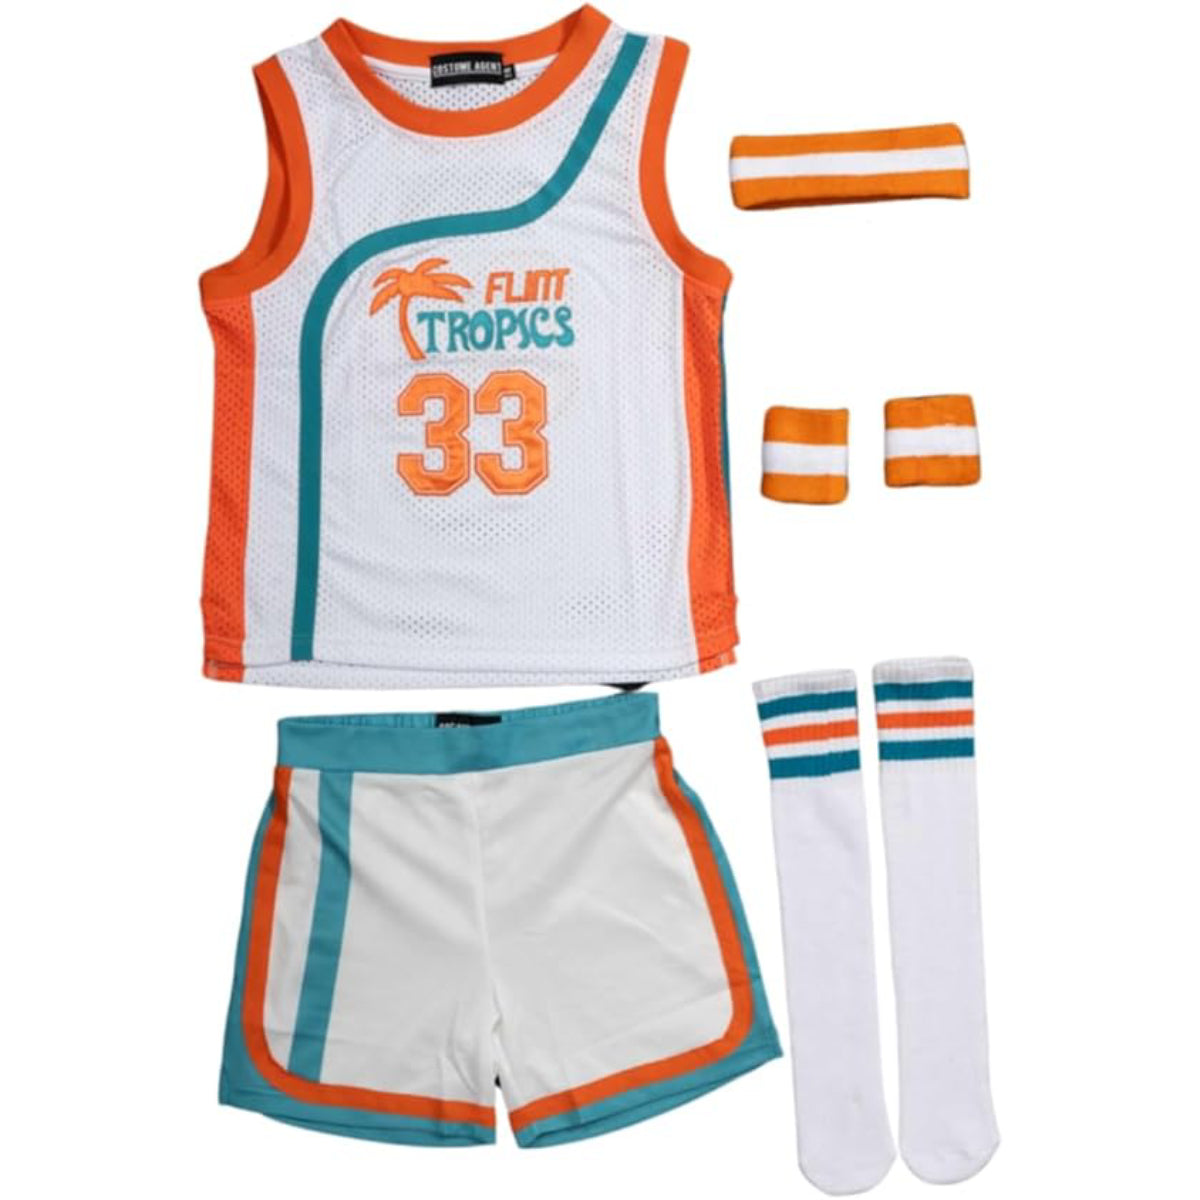 Flint Tropics Costume Set for Kids Channel Your Inner Jackie Moon with Basketball Jersey and Complete Ensemble for Halloween Cosplay